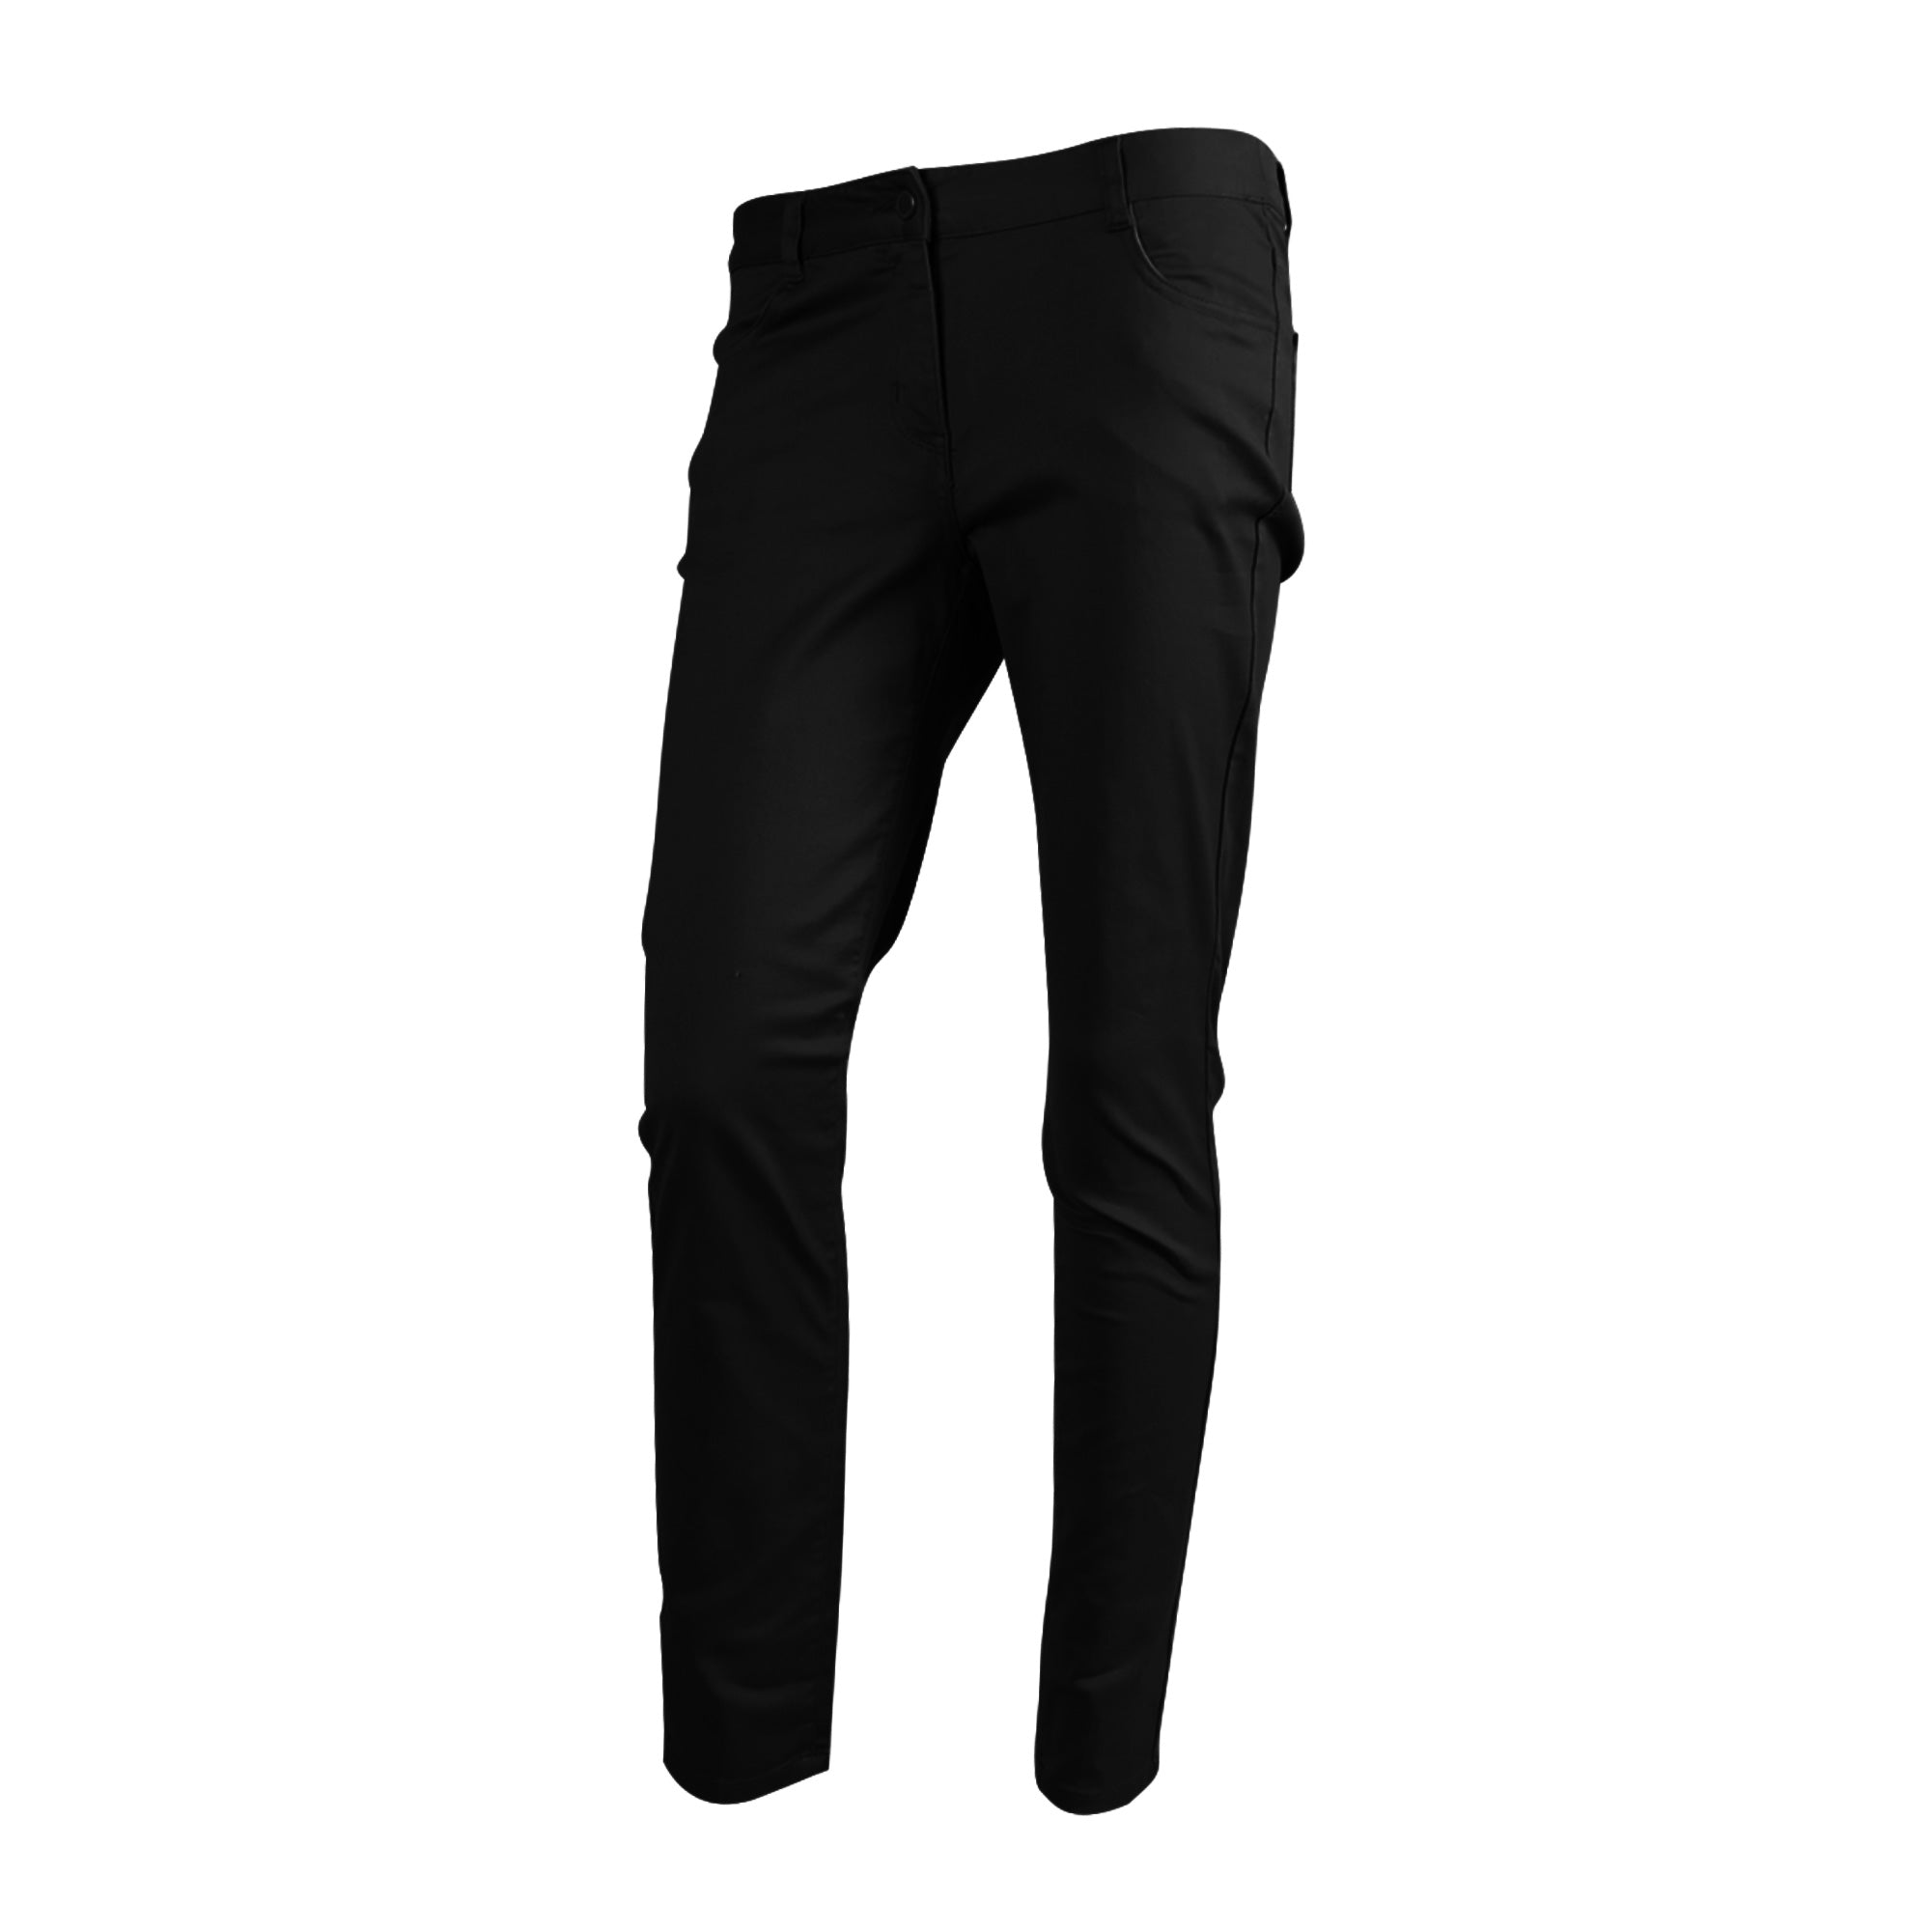 Women's Mid Rise Slim Tapered Jeans